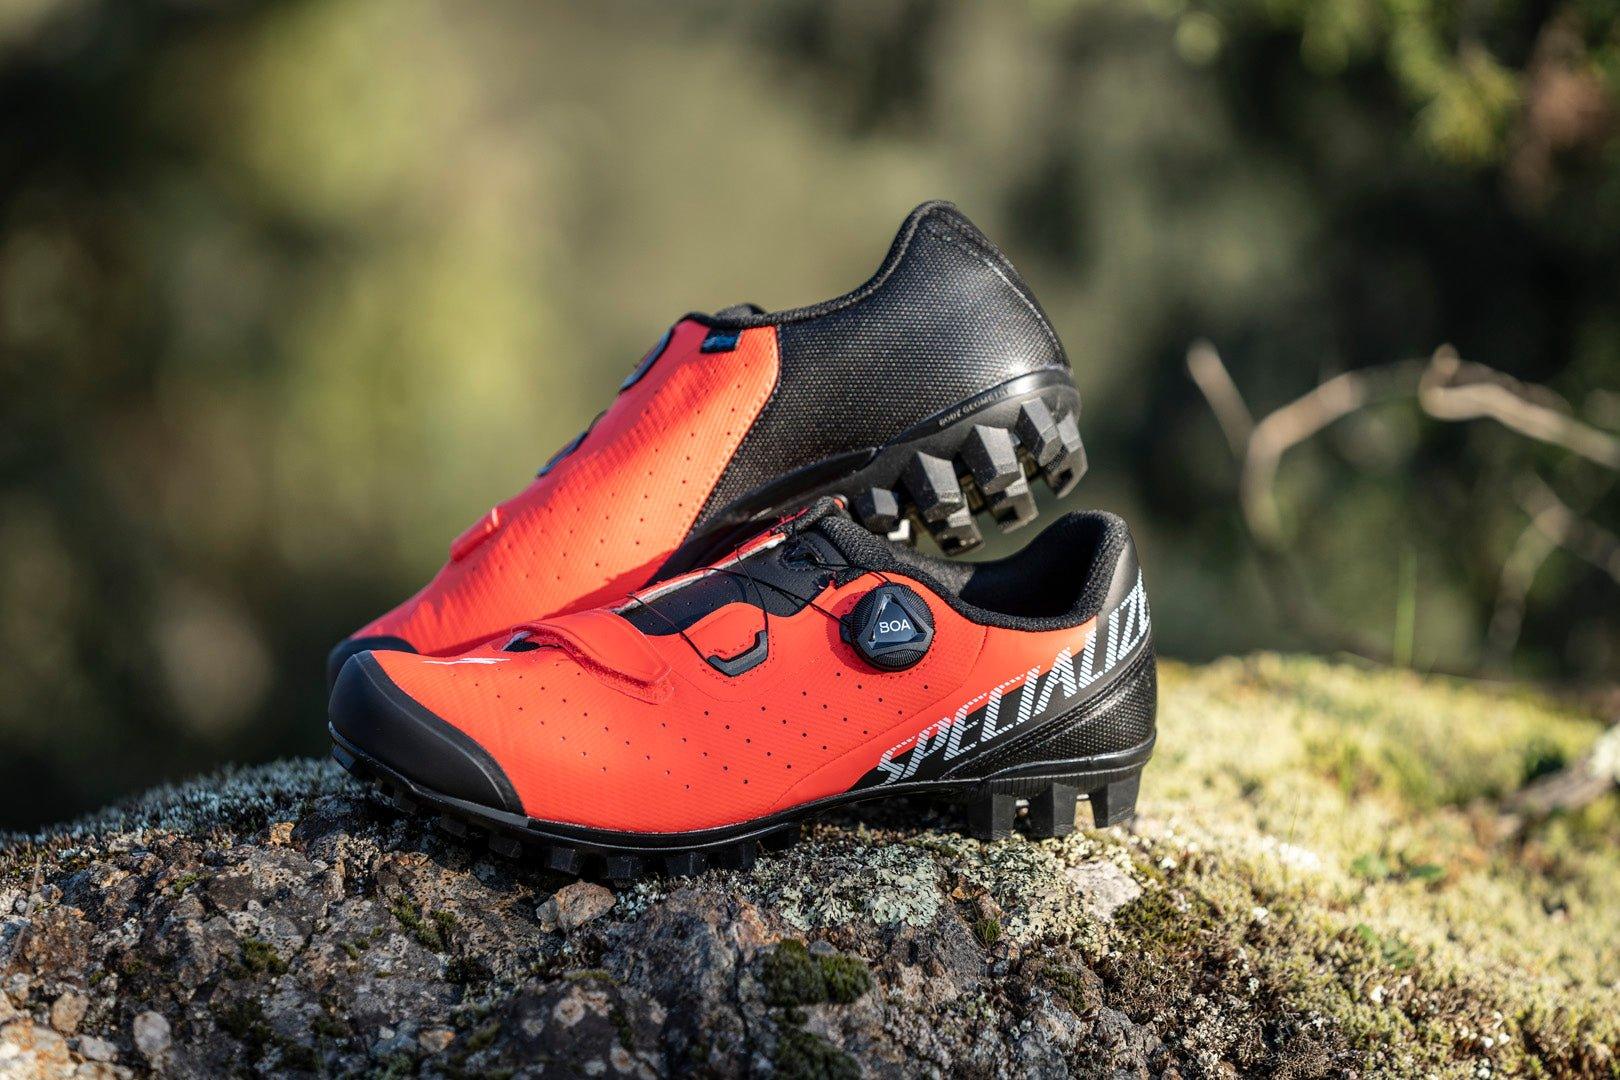 Mountain Shoes - Strictly Bicycles 